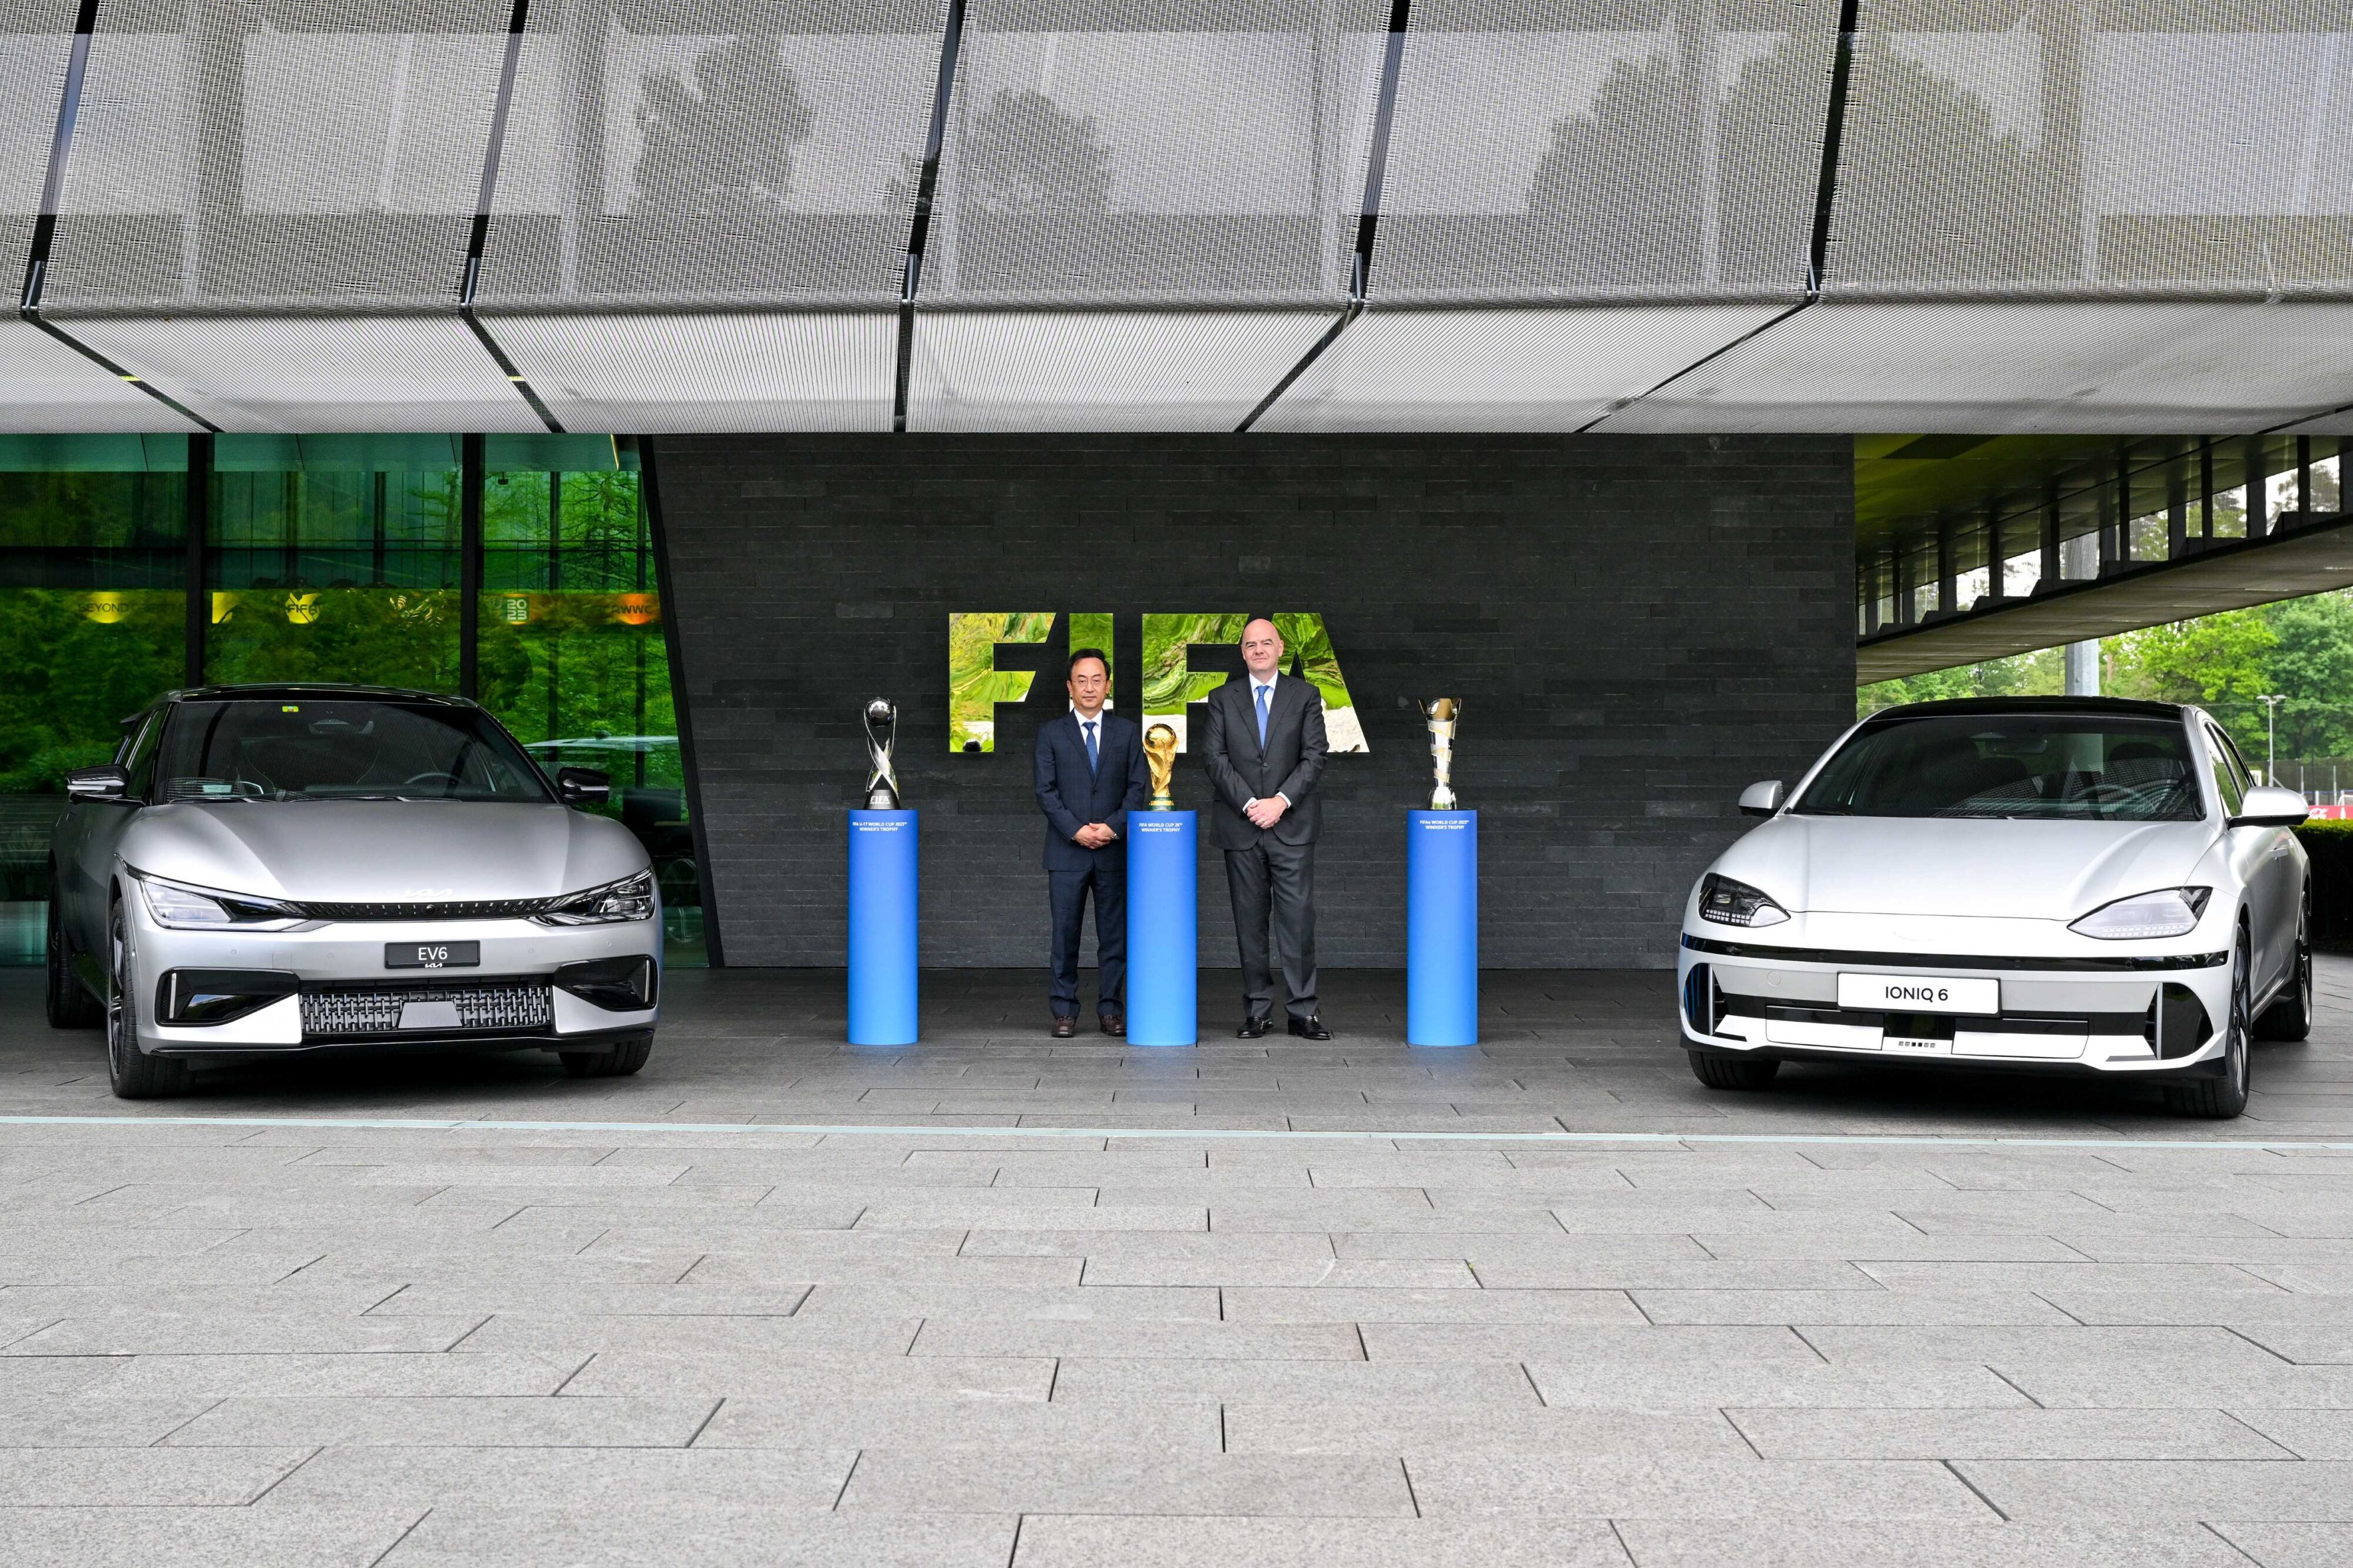 Representatives from Hyundai Motor Group and FIFA pose with the trophies for the football World Cup alongside a Hyundai IONIQ 6 in white and a KIA EV6 GT in grey.